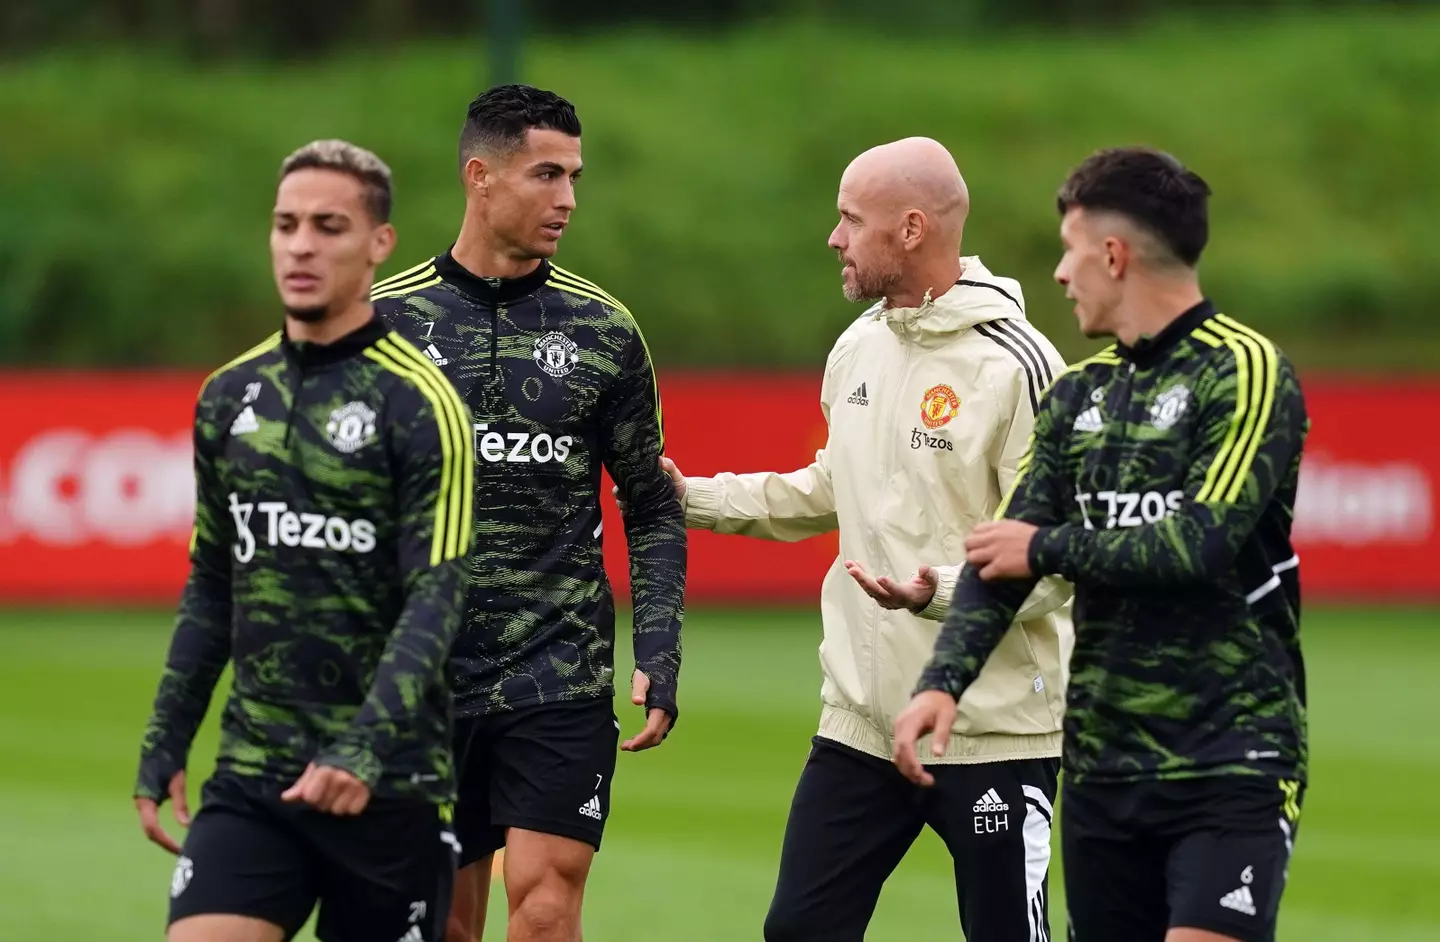 Ronaldo's relationship with Ten Hag is at an all-time low (Image: Alamy)